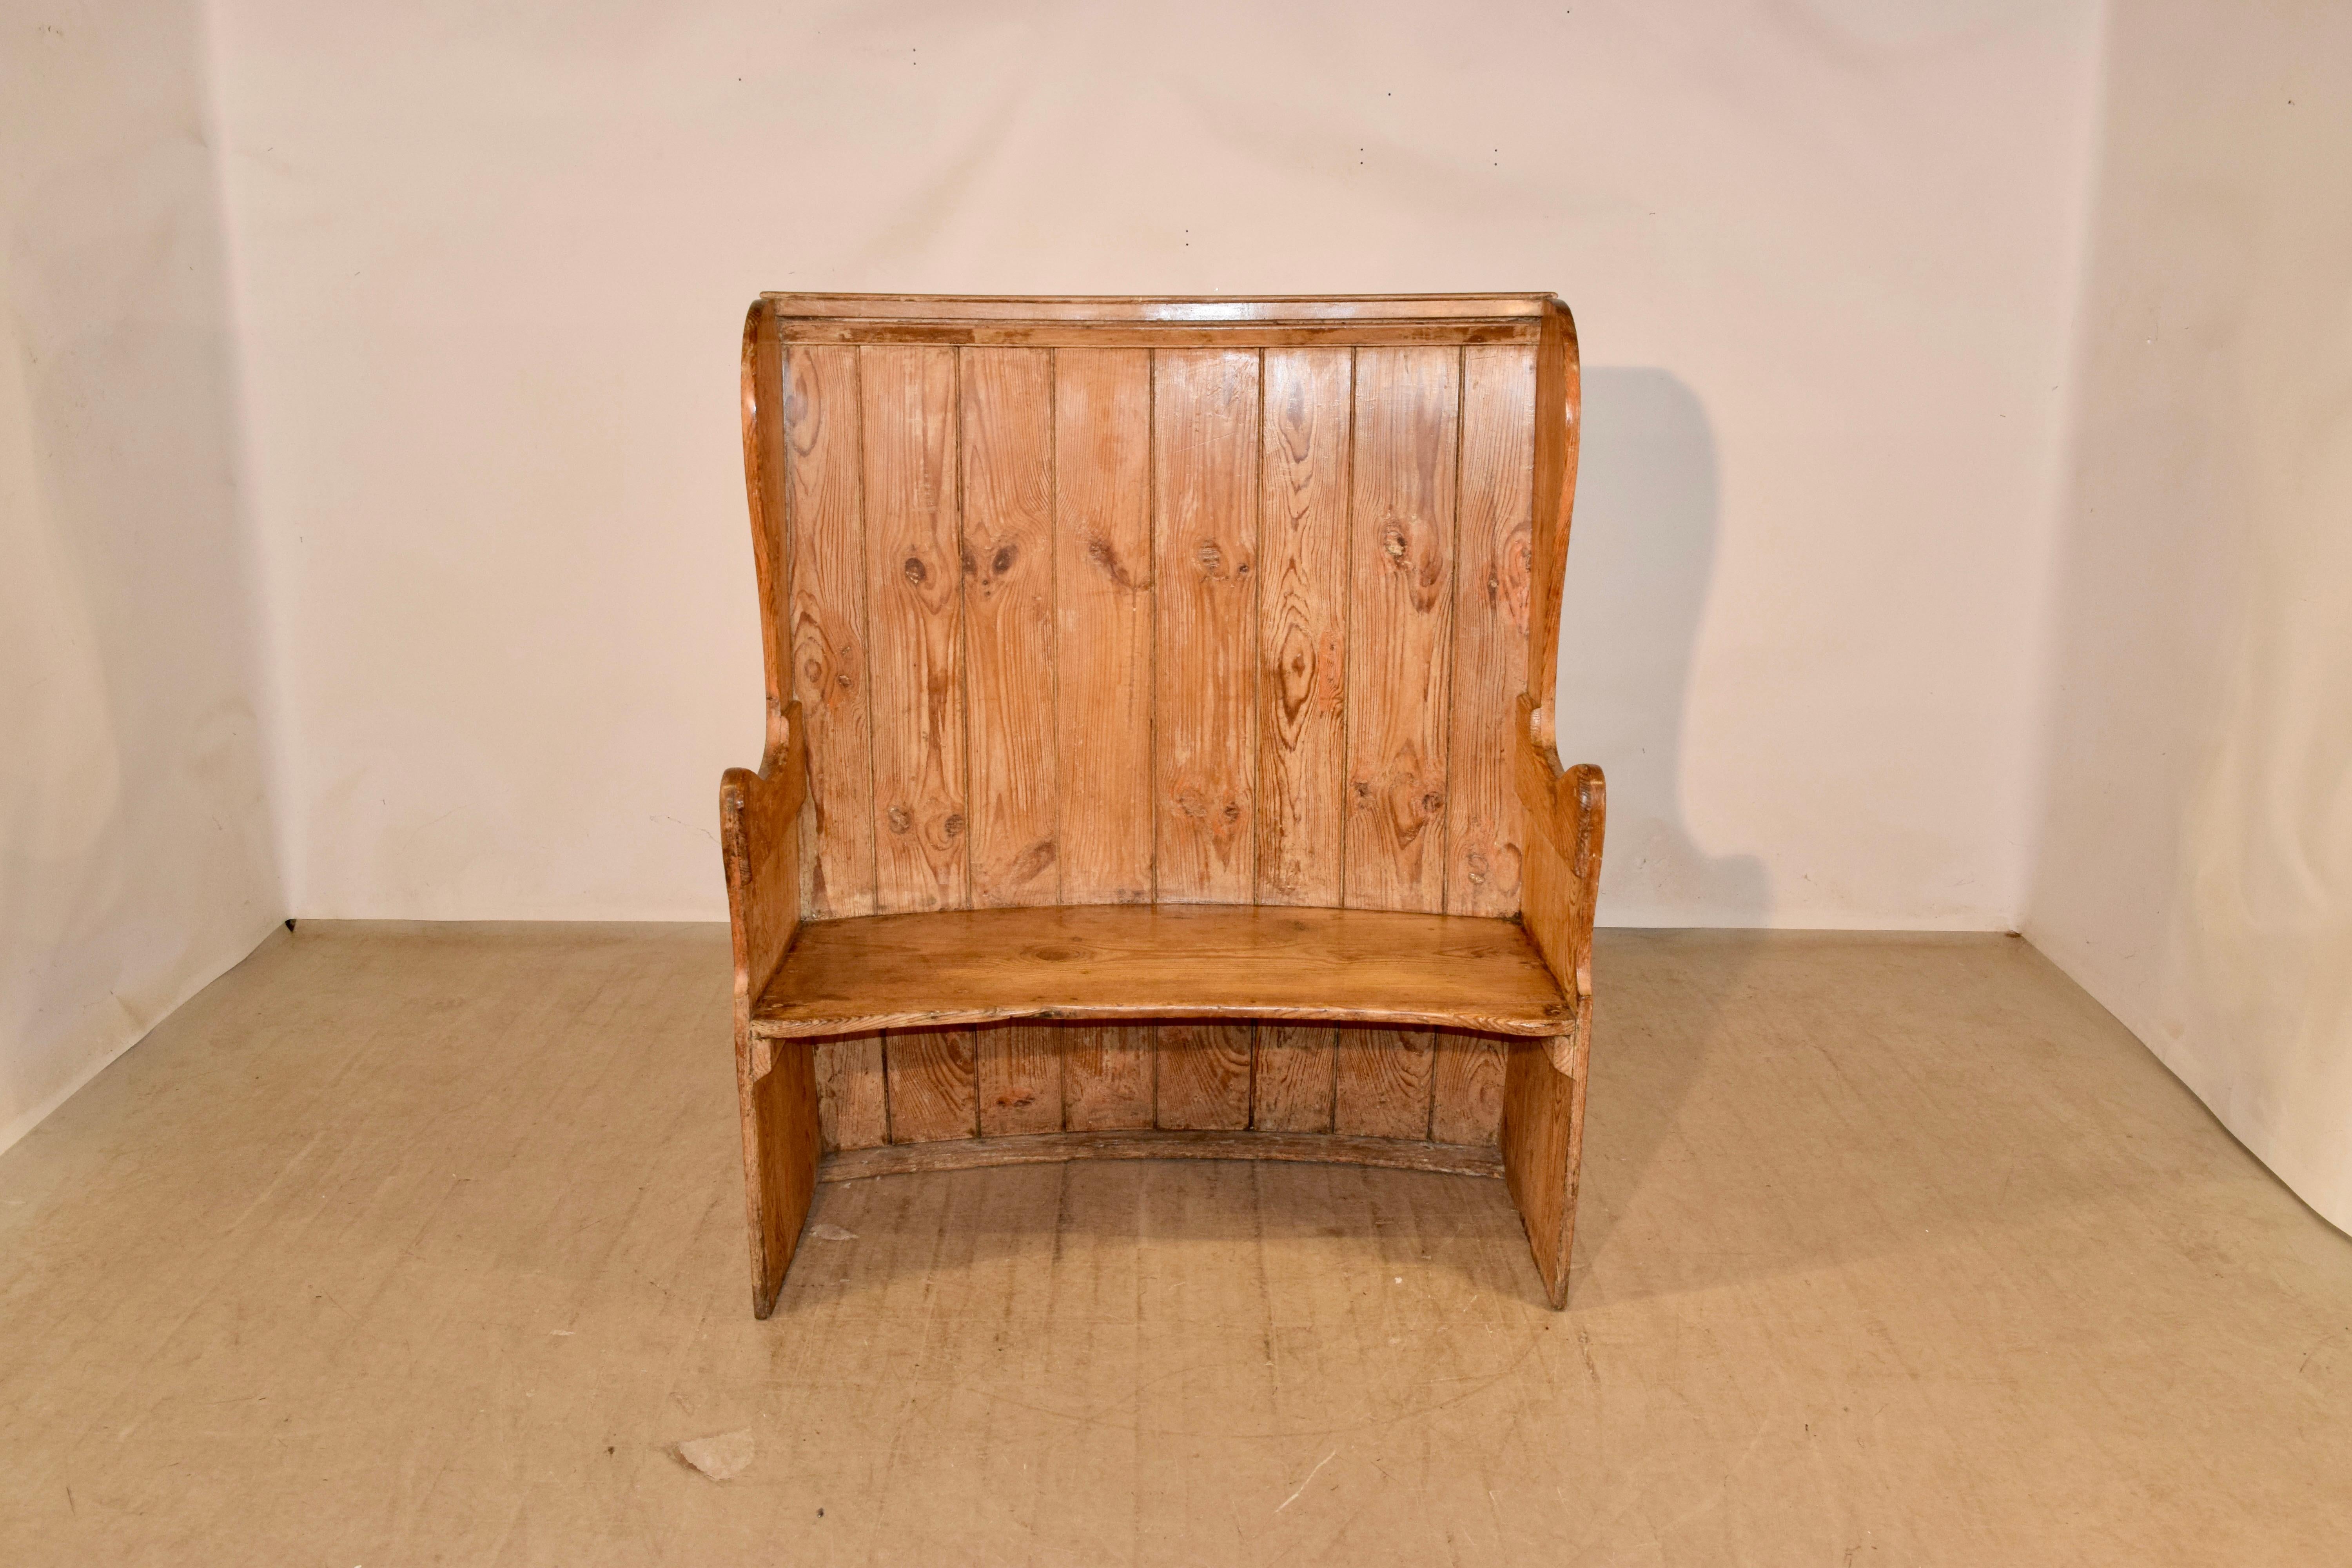 Wonderful 18th century English pine settle with a gently curved form. It has a plank back with wing sides and gently curved arms, surrounding a single plank seat.